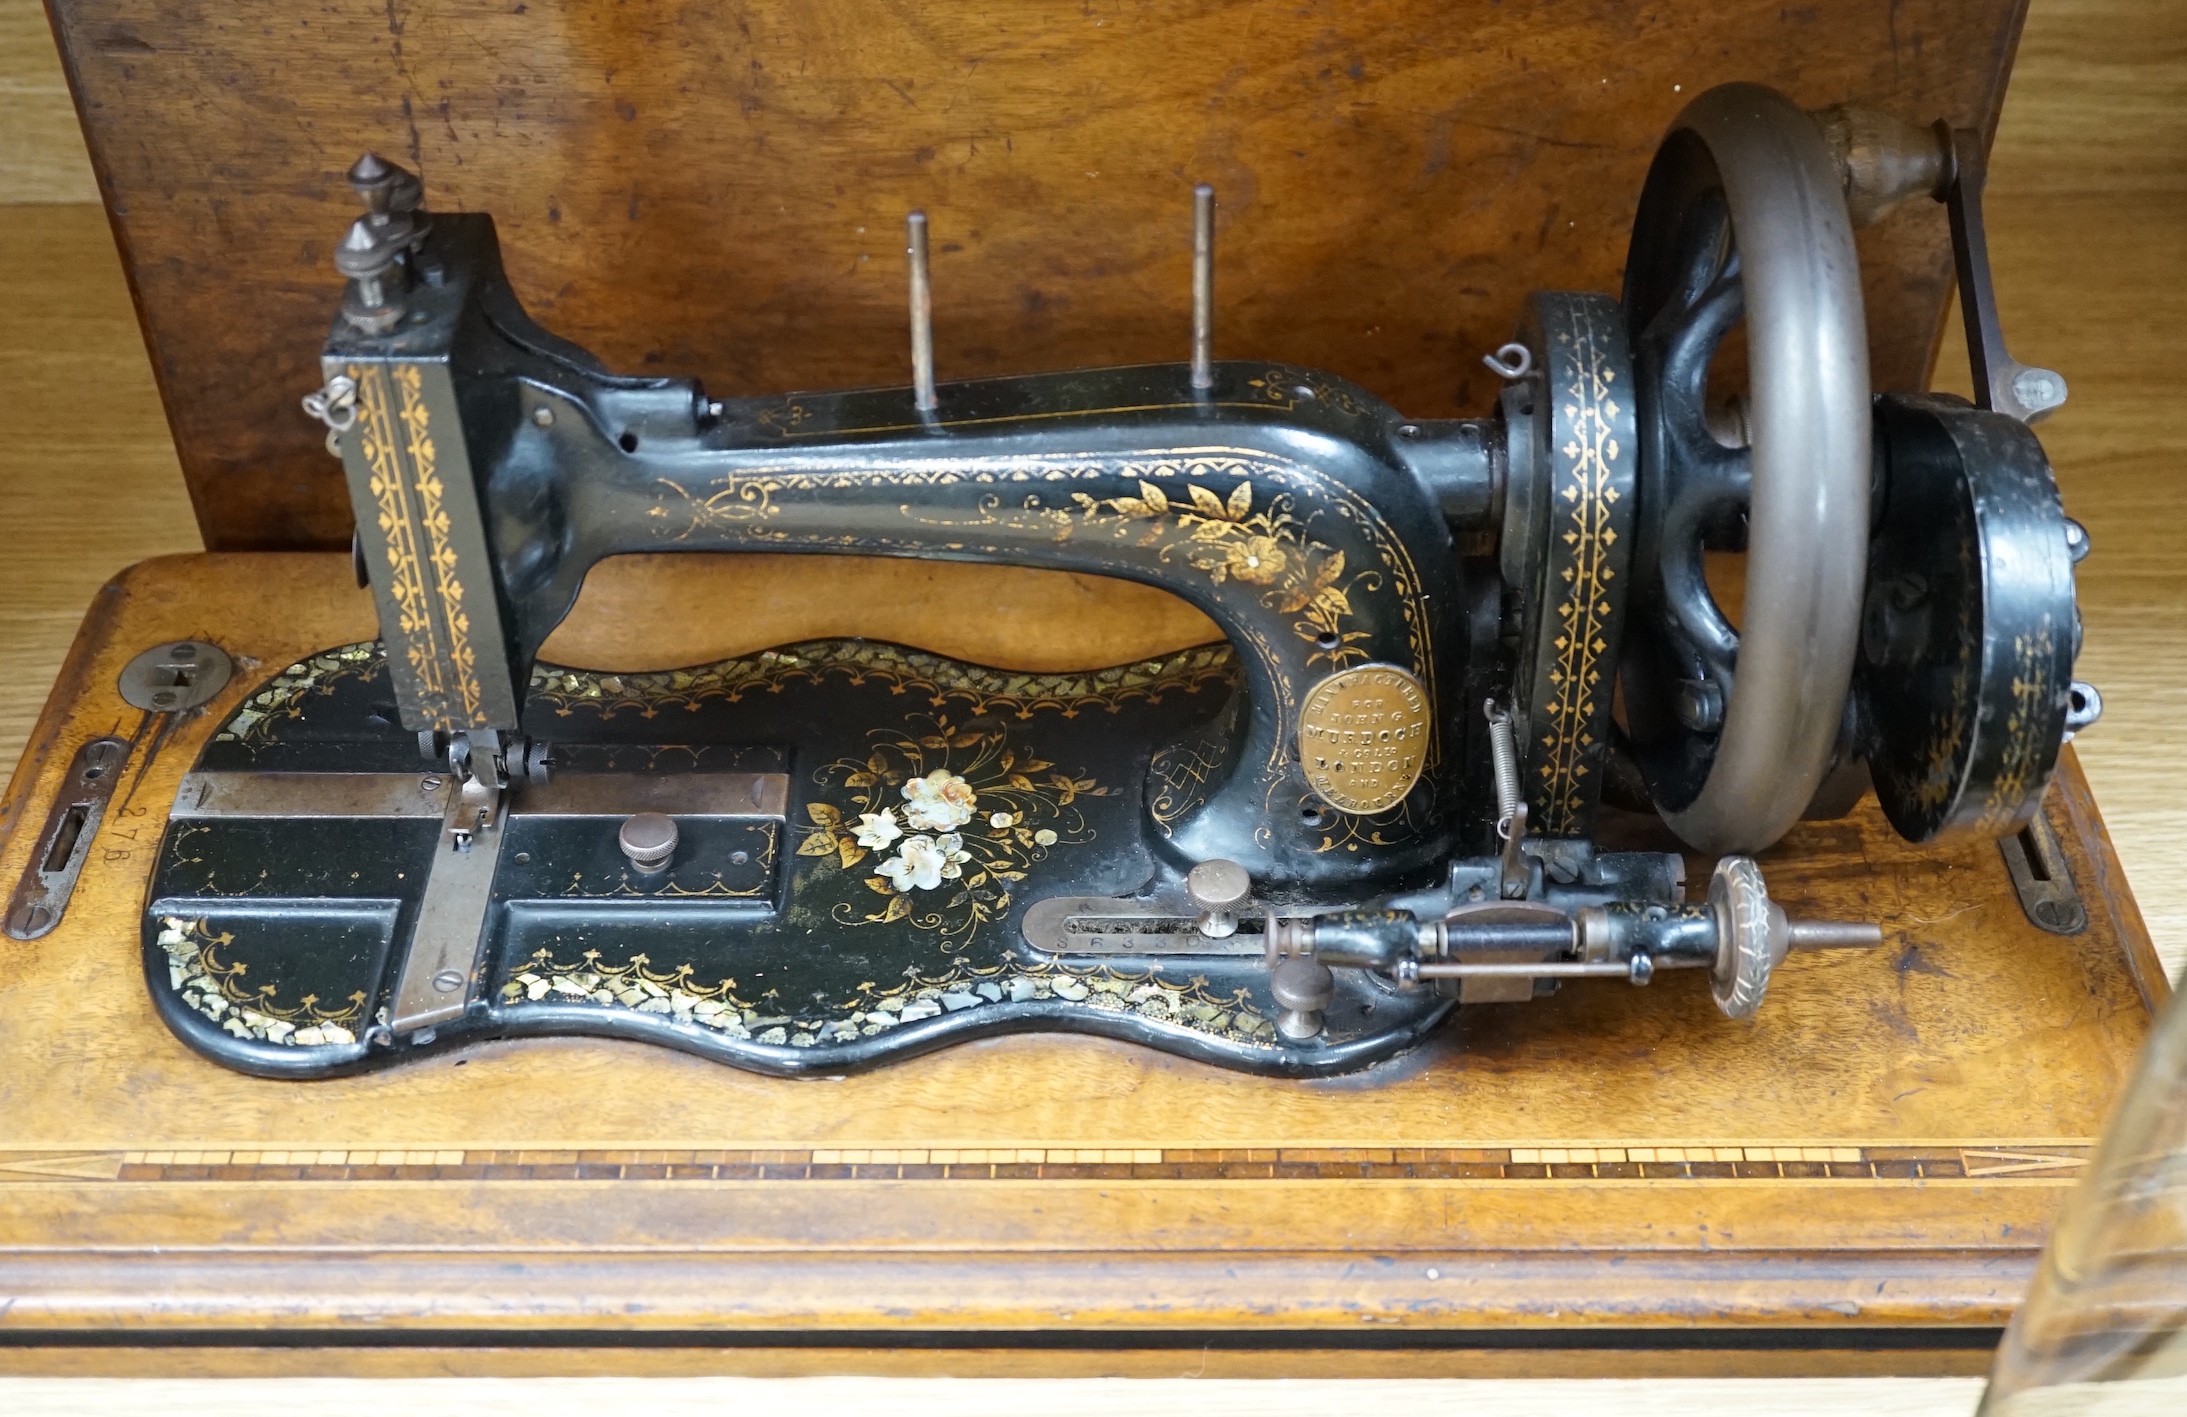 A 19th century mother of pearl decorated John Murdoch sewing machine with wooden case